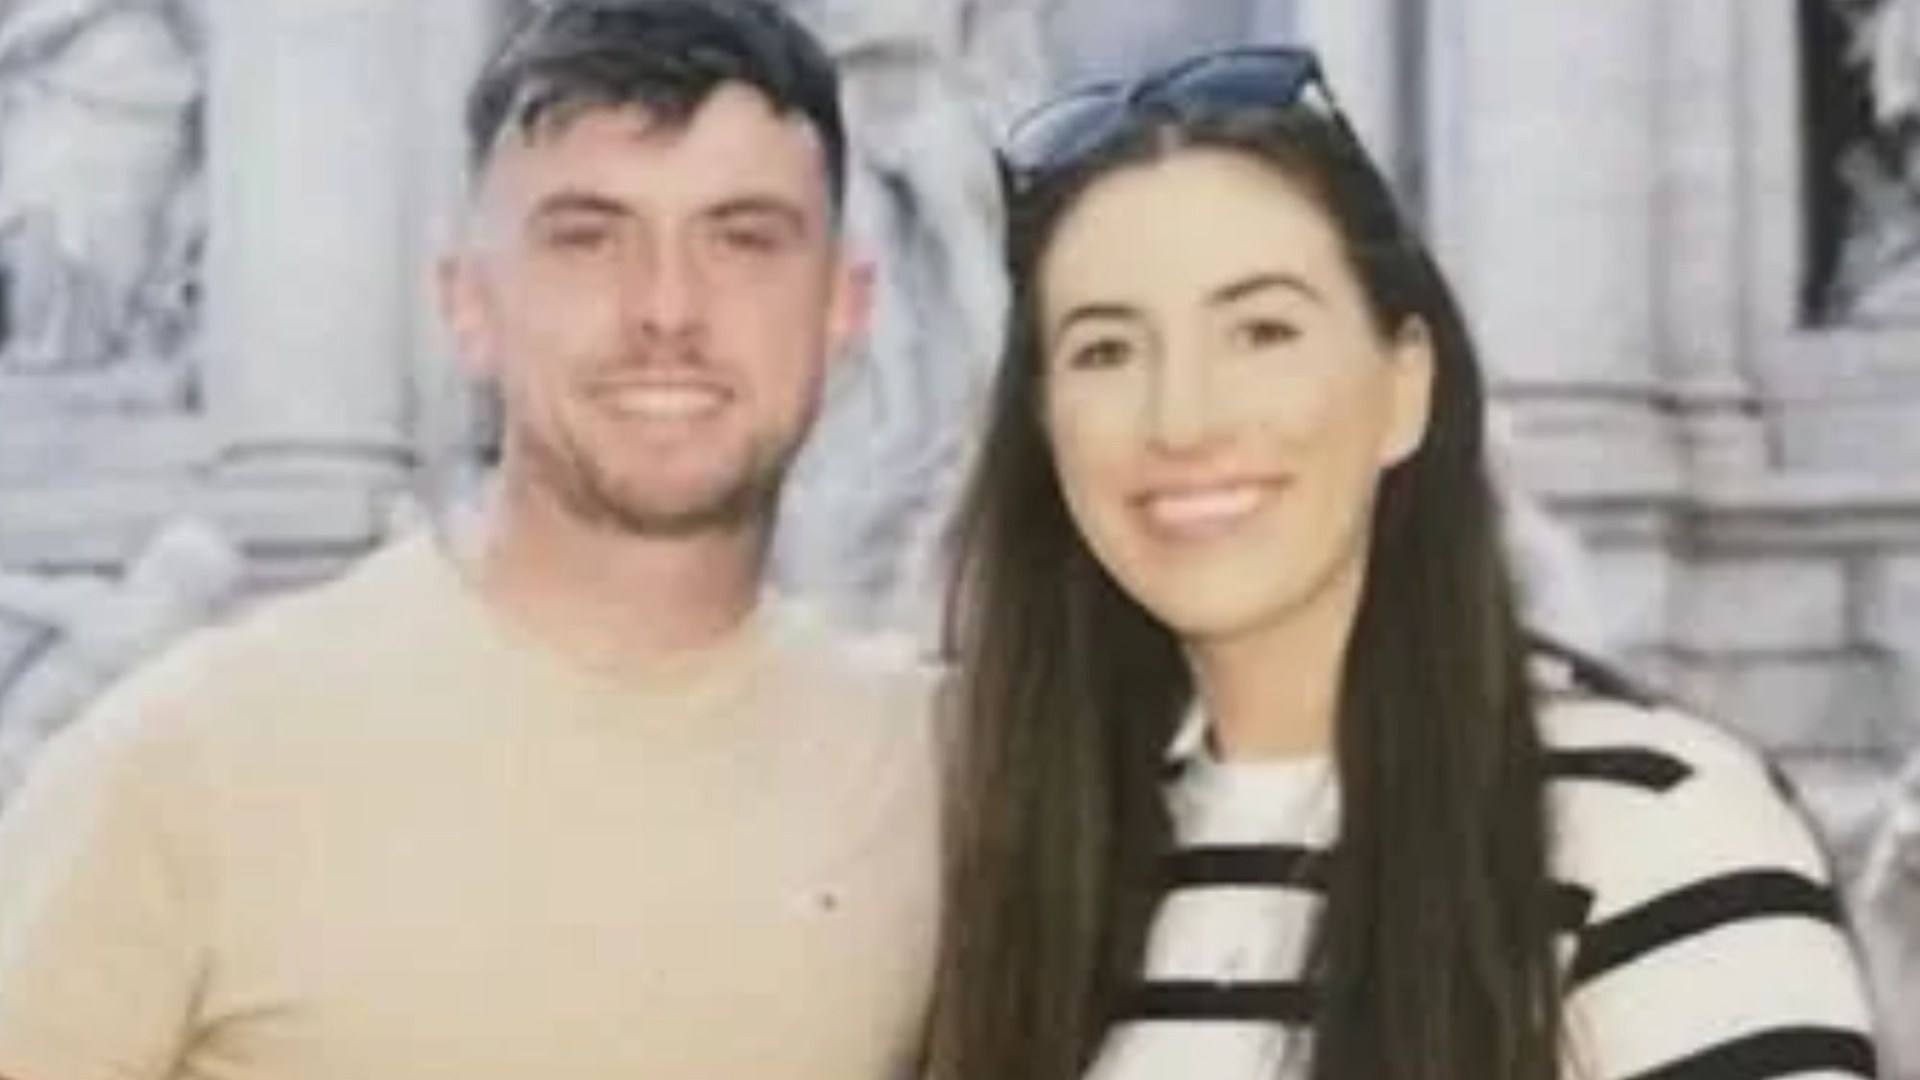 Carlow man ‘fighting for his life’ in coma as family raise money for ‘long road to recovery’ after accident in Rome [Video]